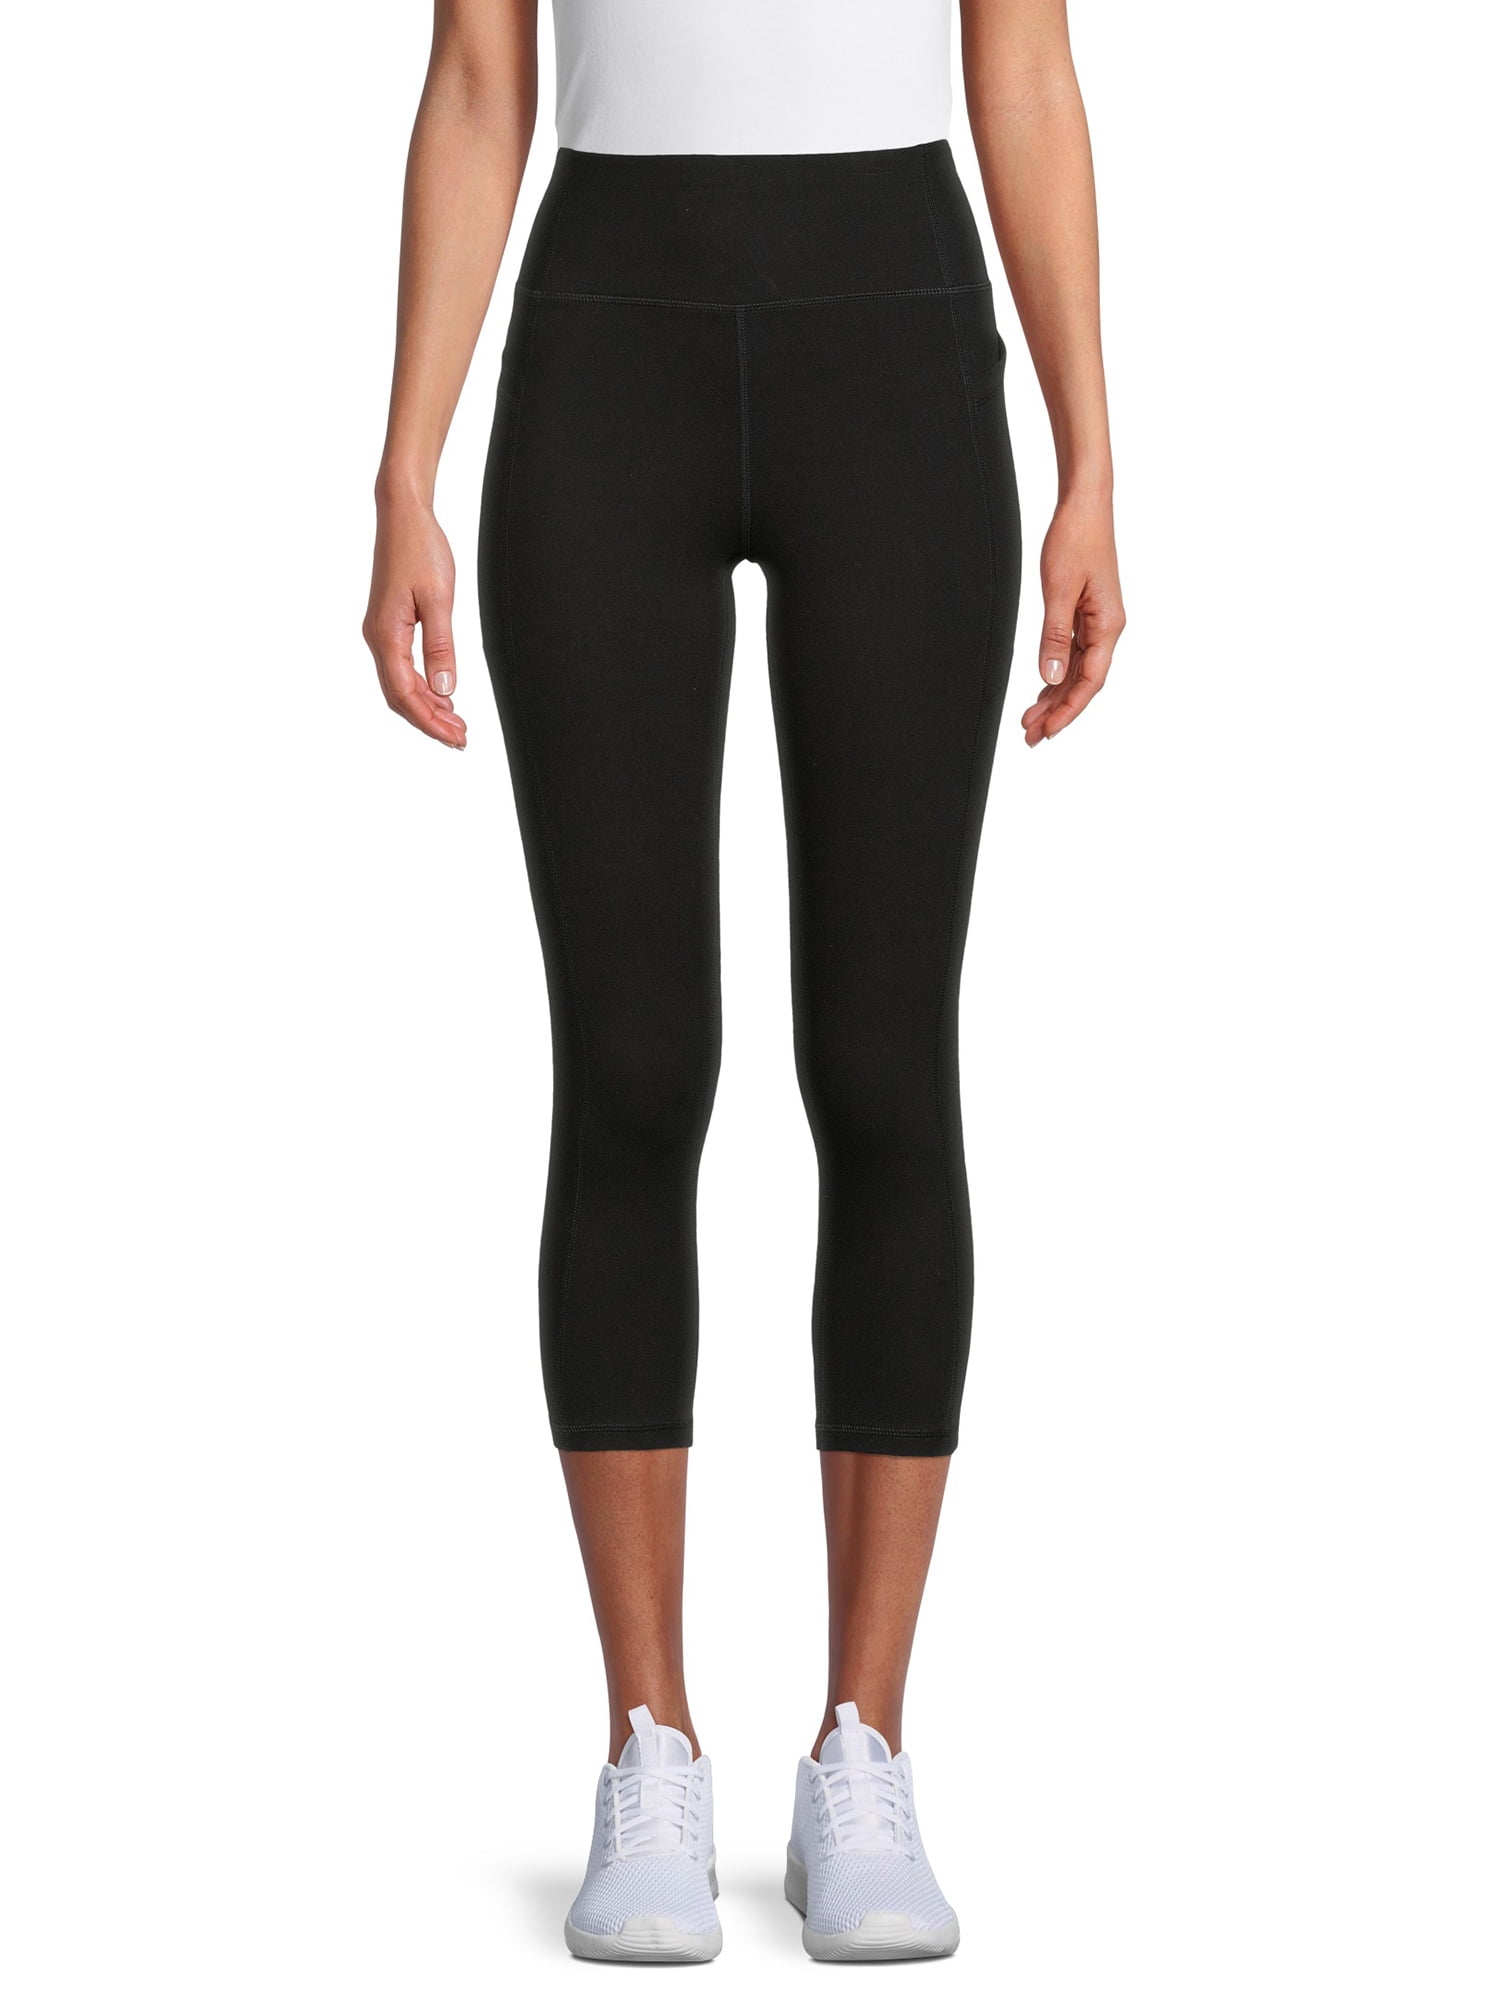 Athletic Works Avia Women’s Stretch Cotton Blend Capri Leggings with Side Pockets